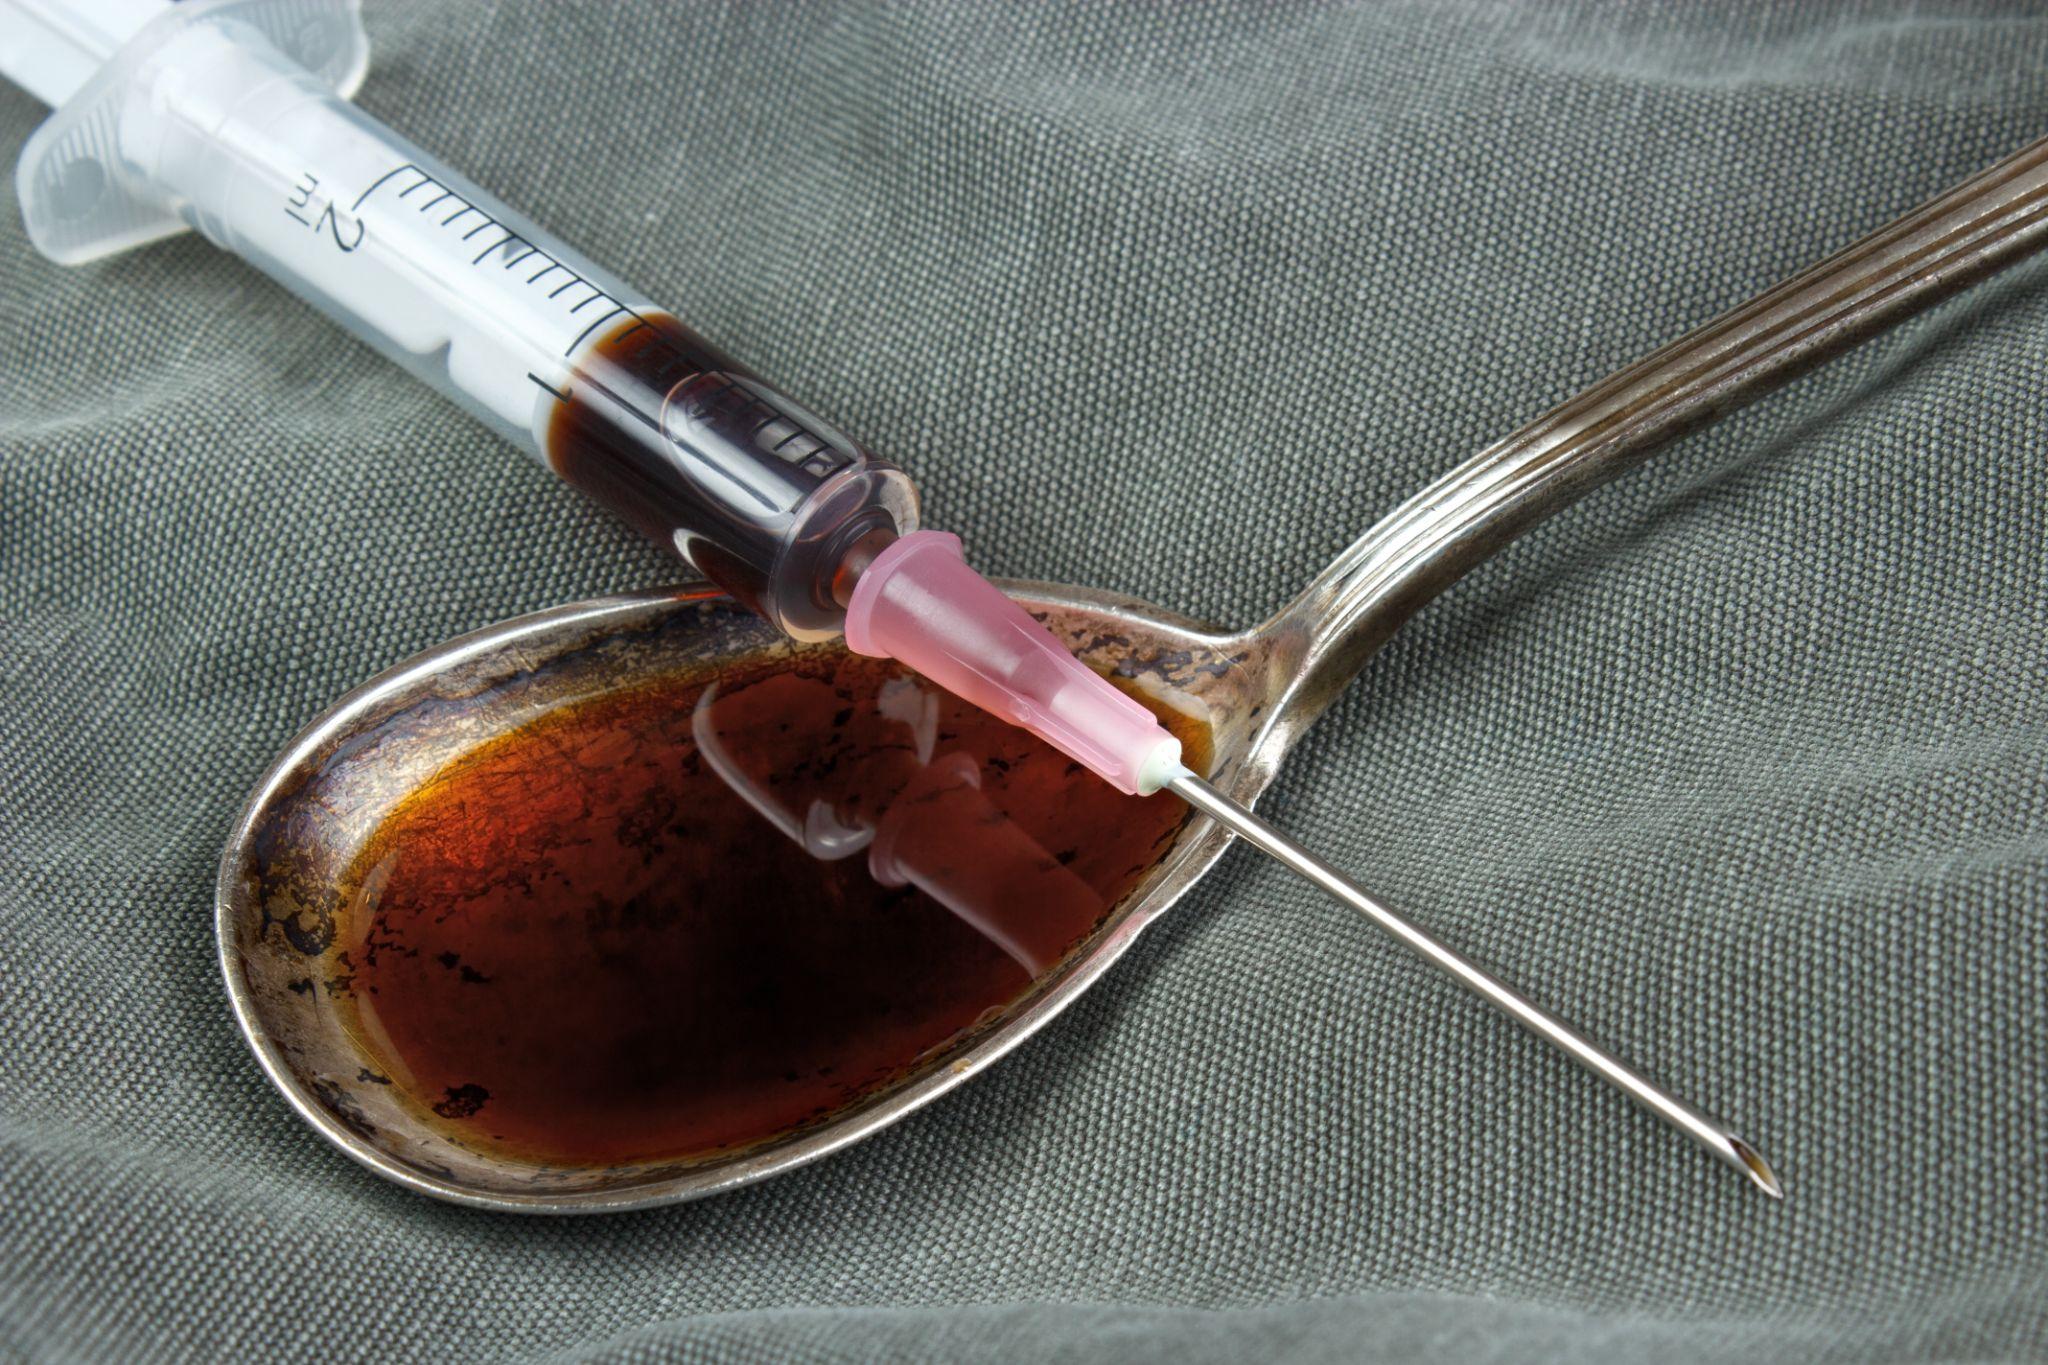 Drug syringe and cooked heroin on spoon